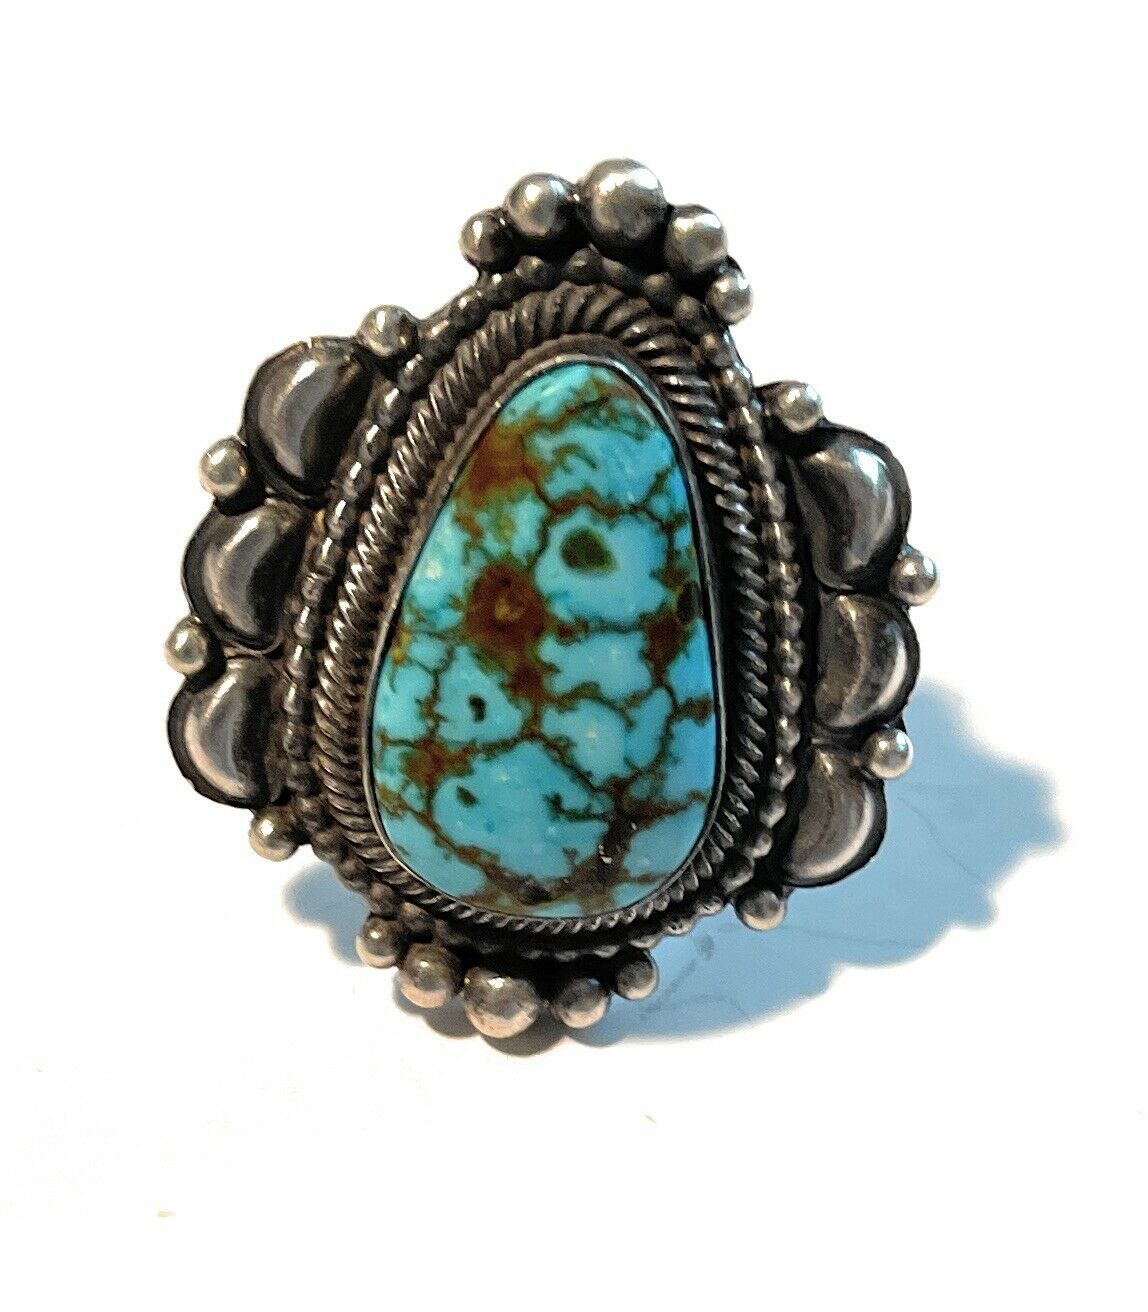 Navajo Sonoran Mountain Turquoise & Sterling Silver Statement Ring Size 7